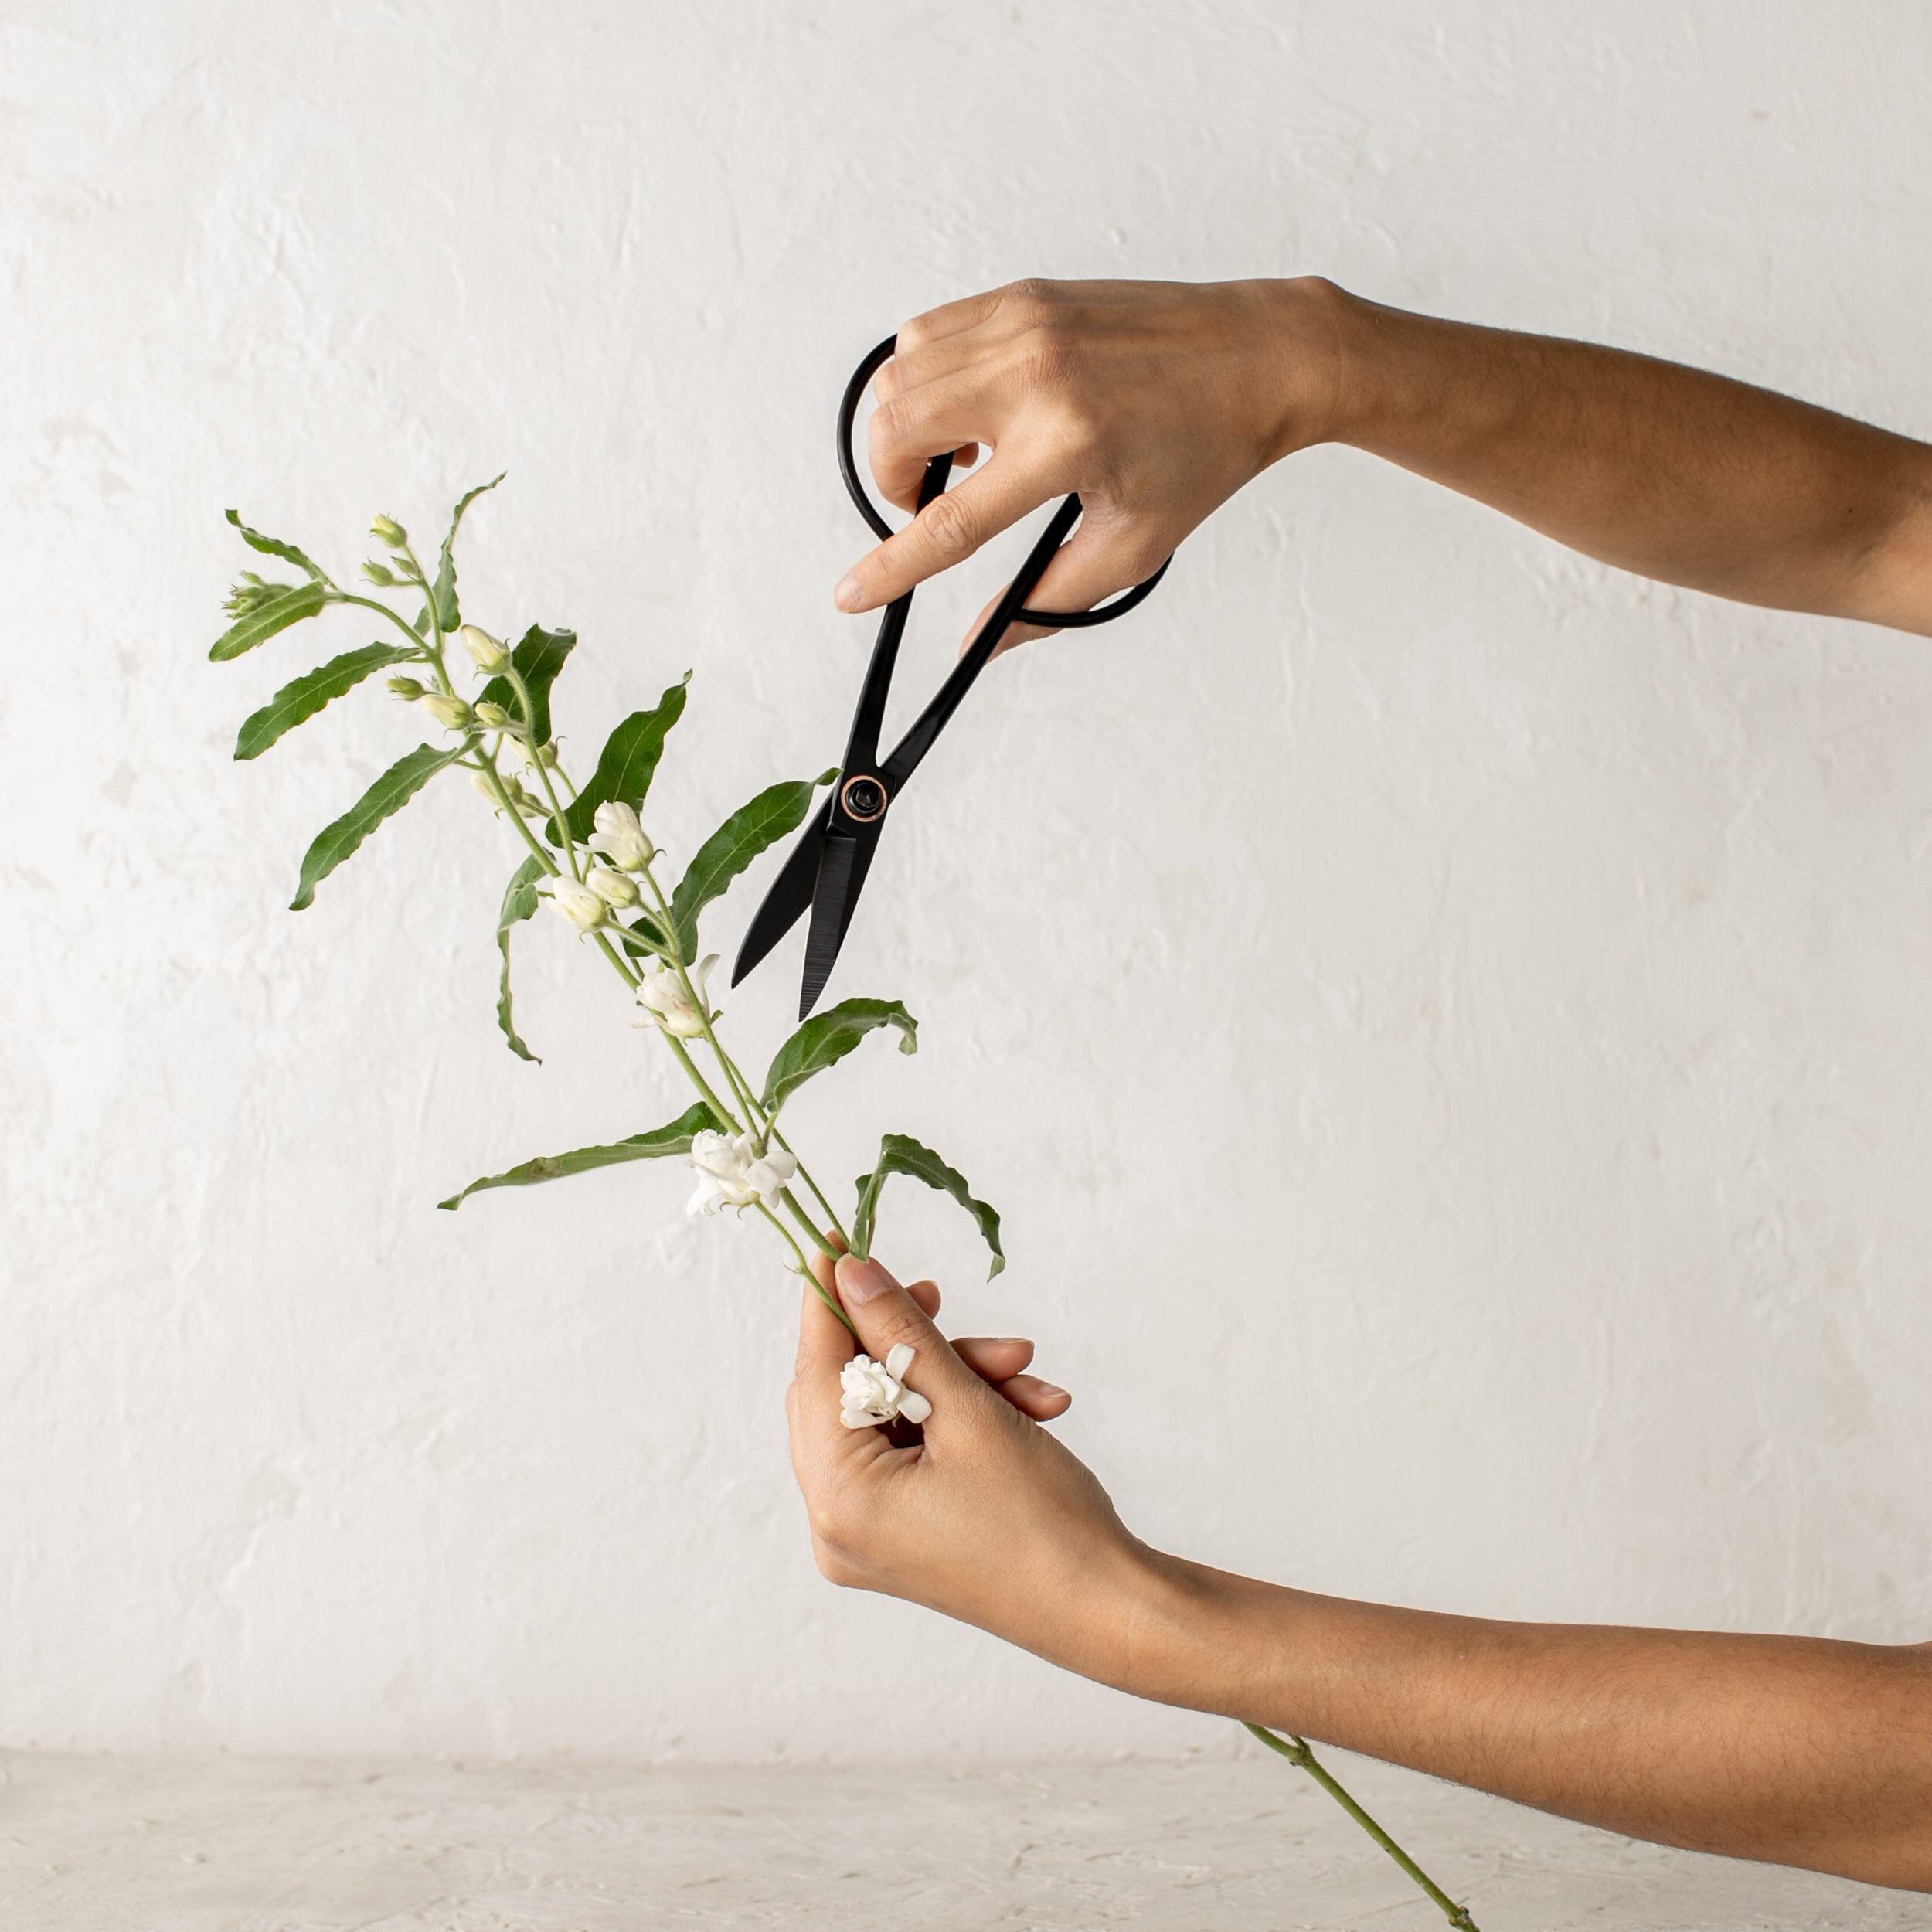 Hands holding white blooming flower and also holding narrow black metal shears about to trim flowers. Sold by Shop Verdant, Kansas City flower and plant store.